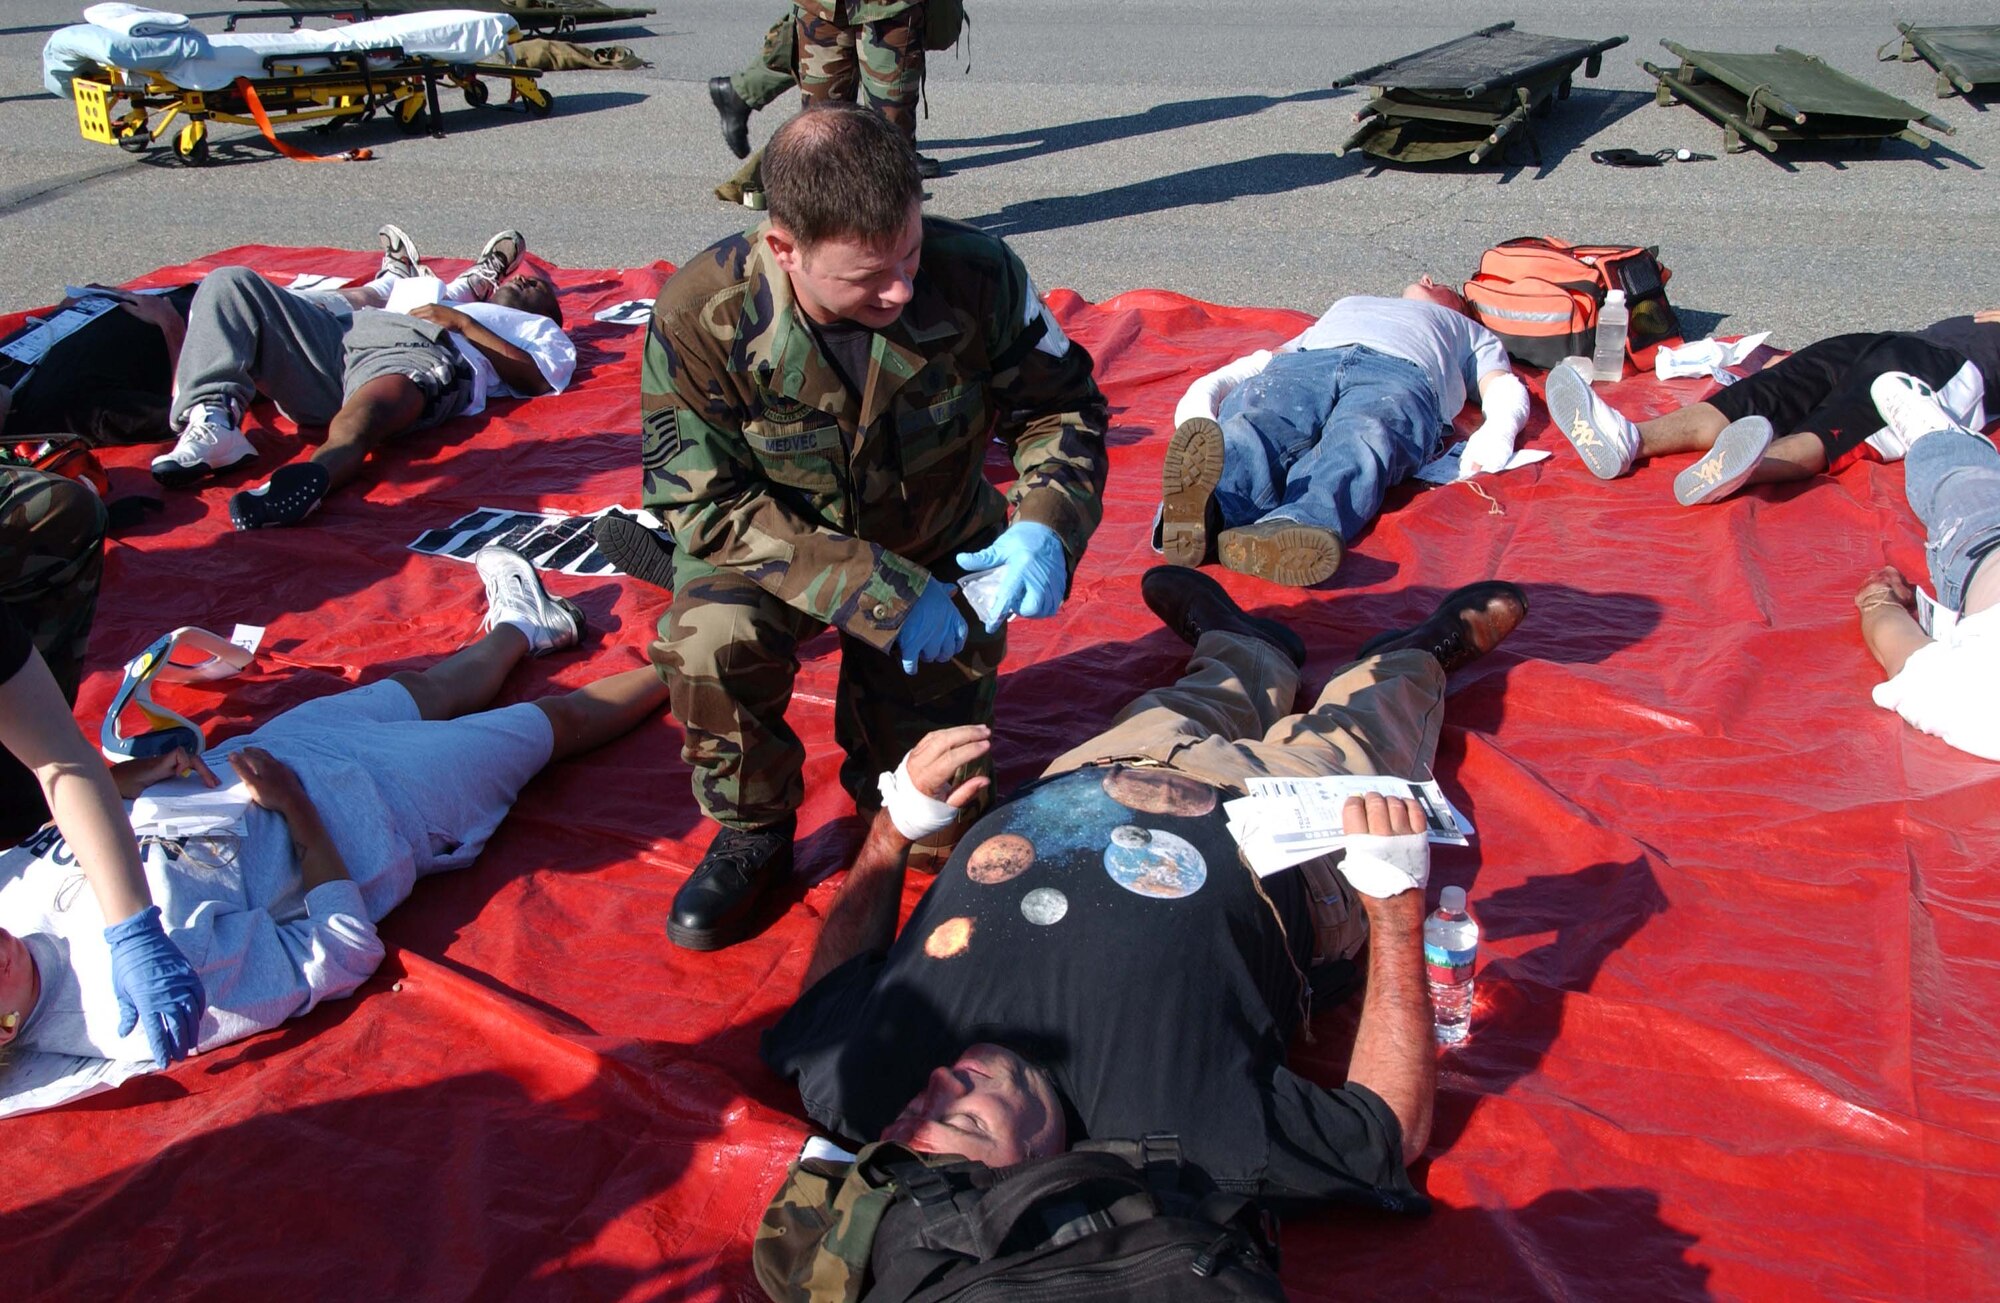 EIELSON AIR FORCE BASE, Alaska --  Tech. Sgt. Landru Medvec, 354th Medical Operations Squadron, performs care on the bystander who became injured during a simulated F-16 crash June 19 here. Eielson held an emergency management exercise to help in the readiness and response in case of unforeseen events, members of the medical group tend to those that are injured and to make sure they get the attention and care they need. (U.S. Air Force photo by Airman 1st Class Christopher Griffin)